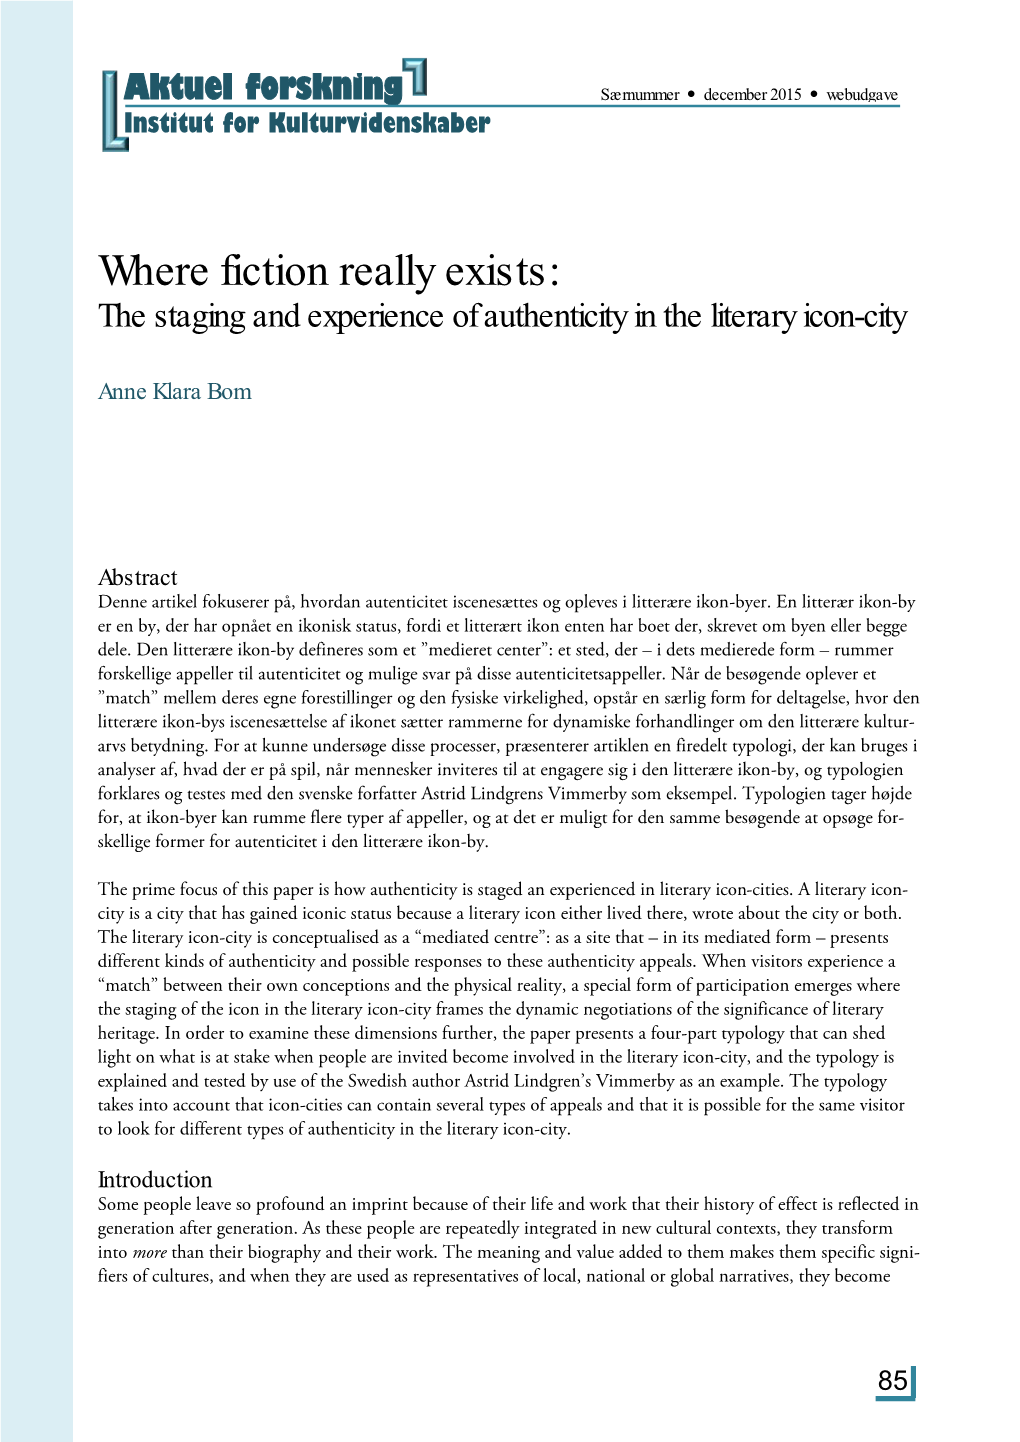 Where Fiction Really Exists: the Staging and Experience of Authenticity in the Literary Icon-City